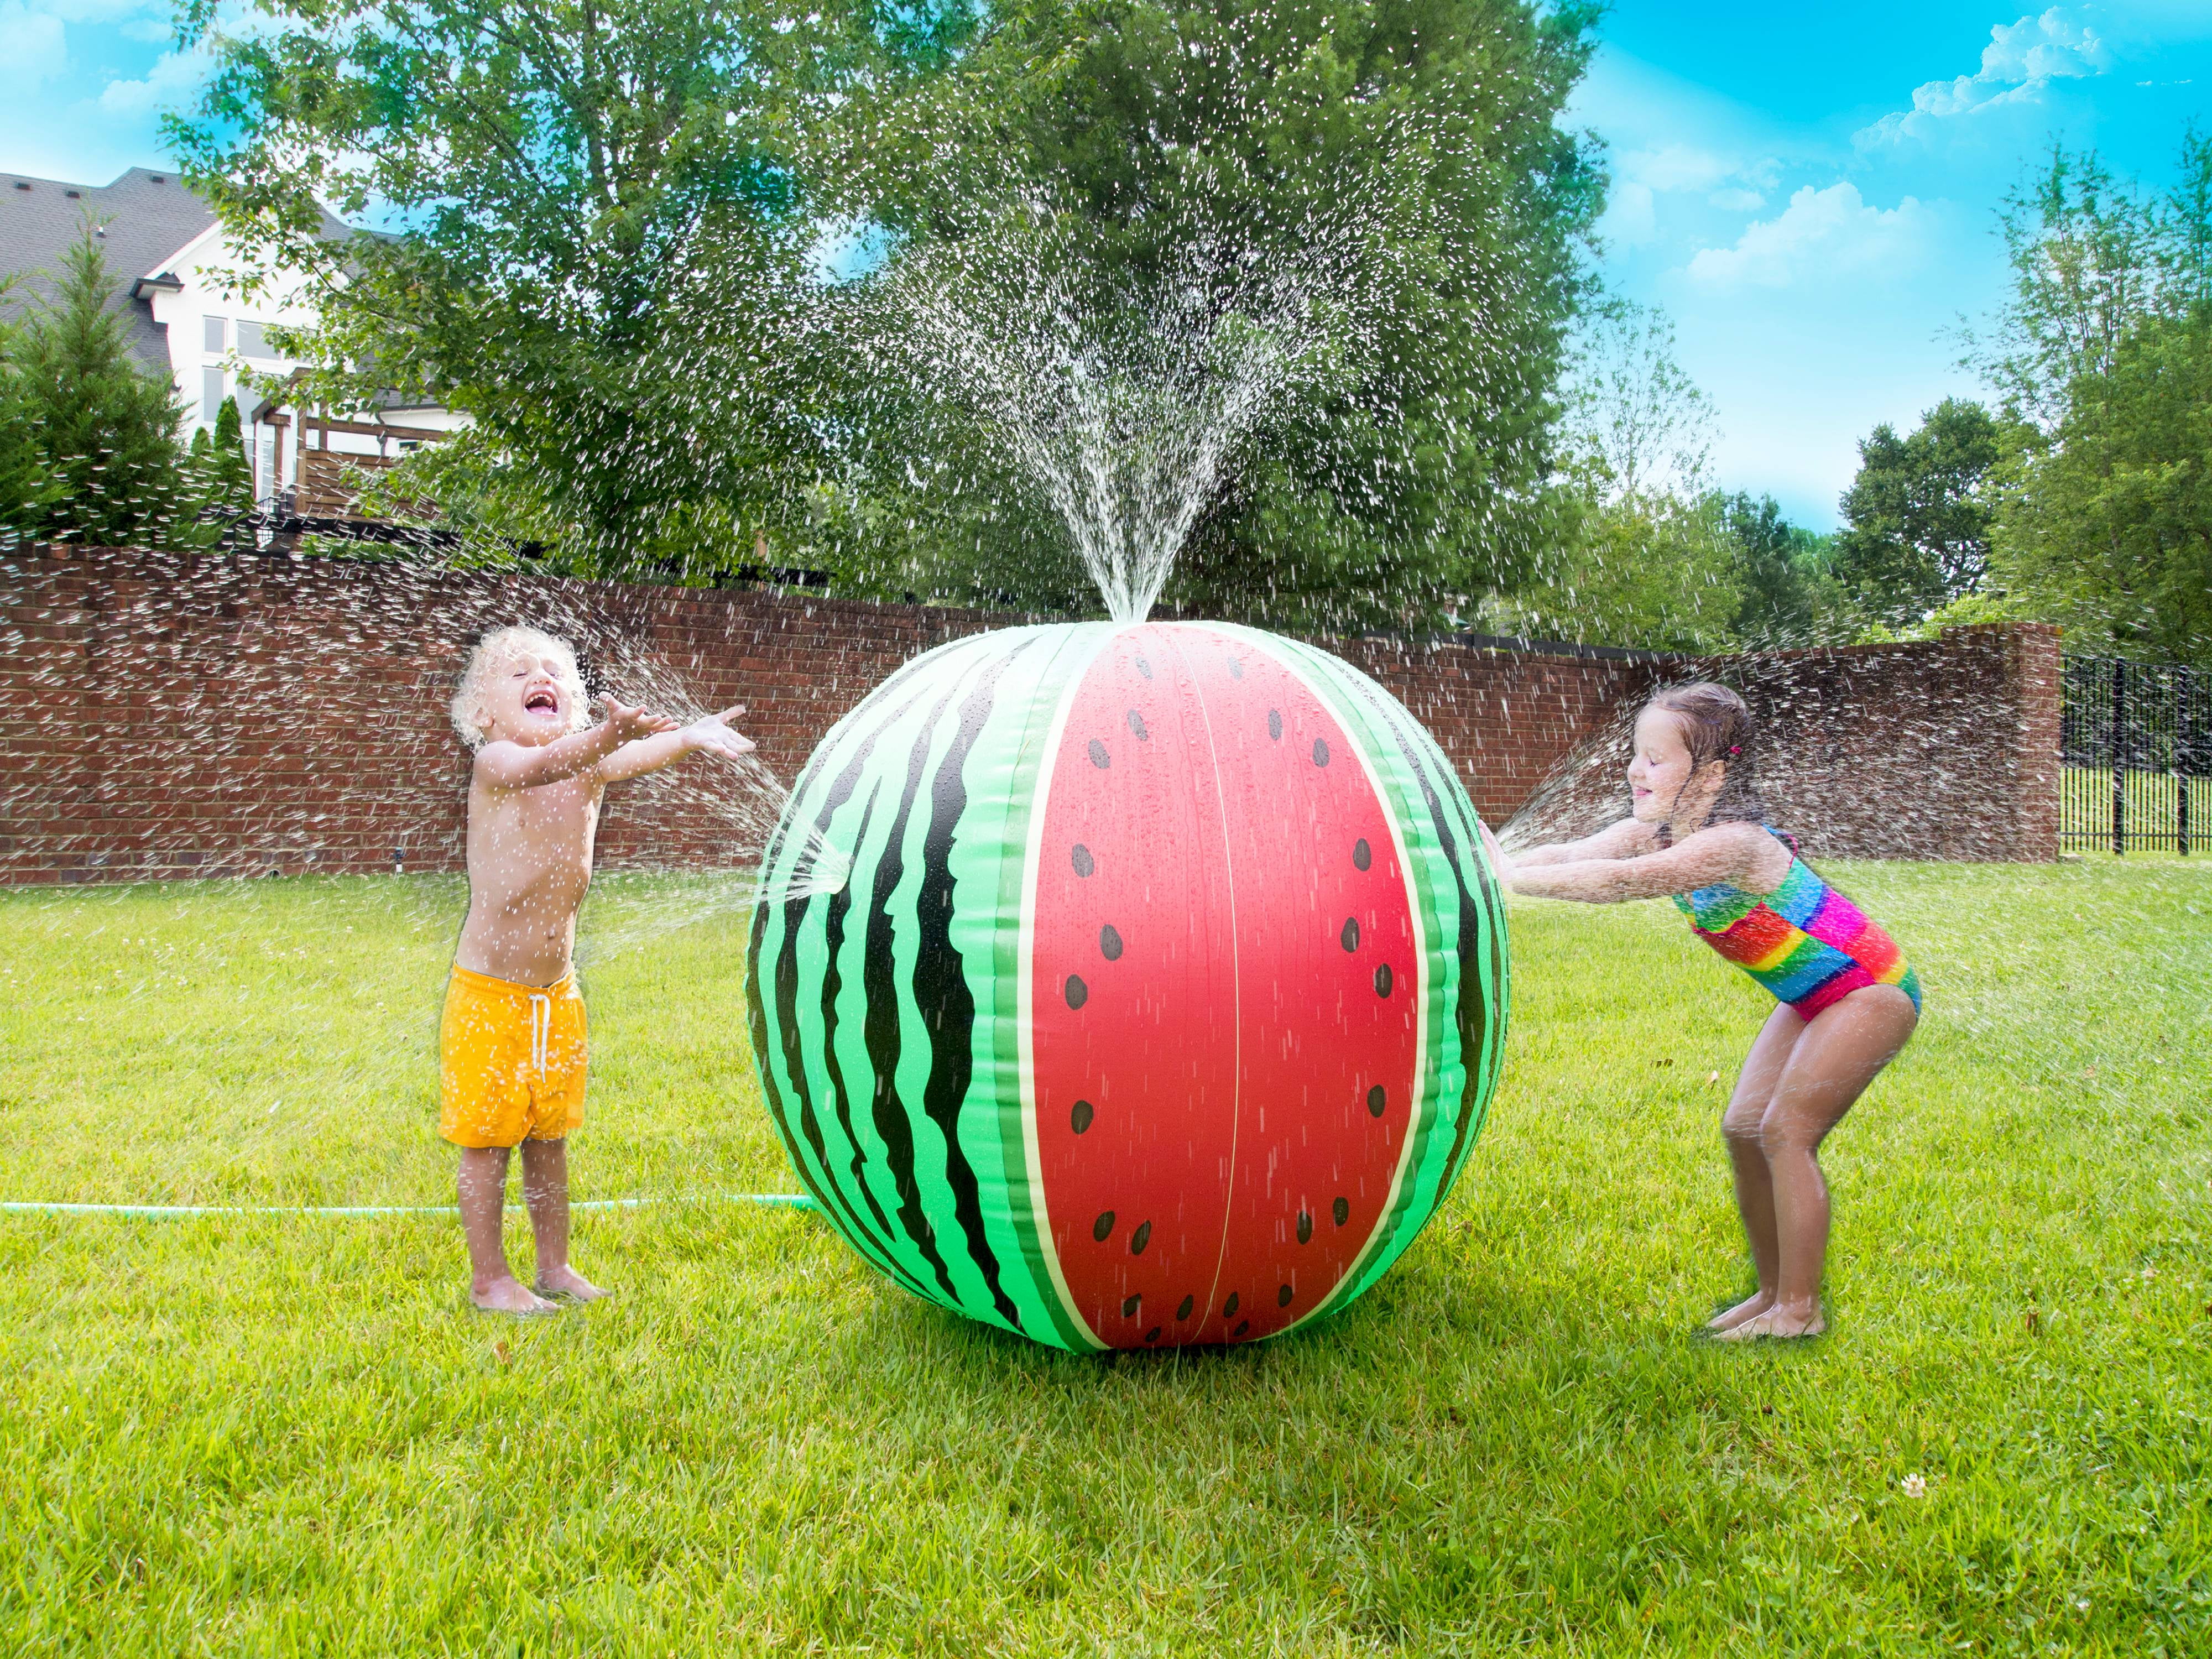 Sprinkler Outdoor Water Spray Ball MIGGOING Splash and Spray Ball 30in-Diameter Inflatable Sprinkler Water Ball Outdoor Fun Toy for Hot Summer Swimming Party Beach Pool Play 